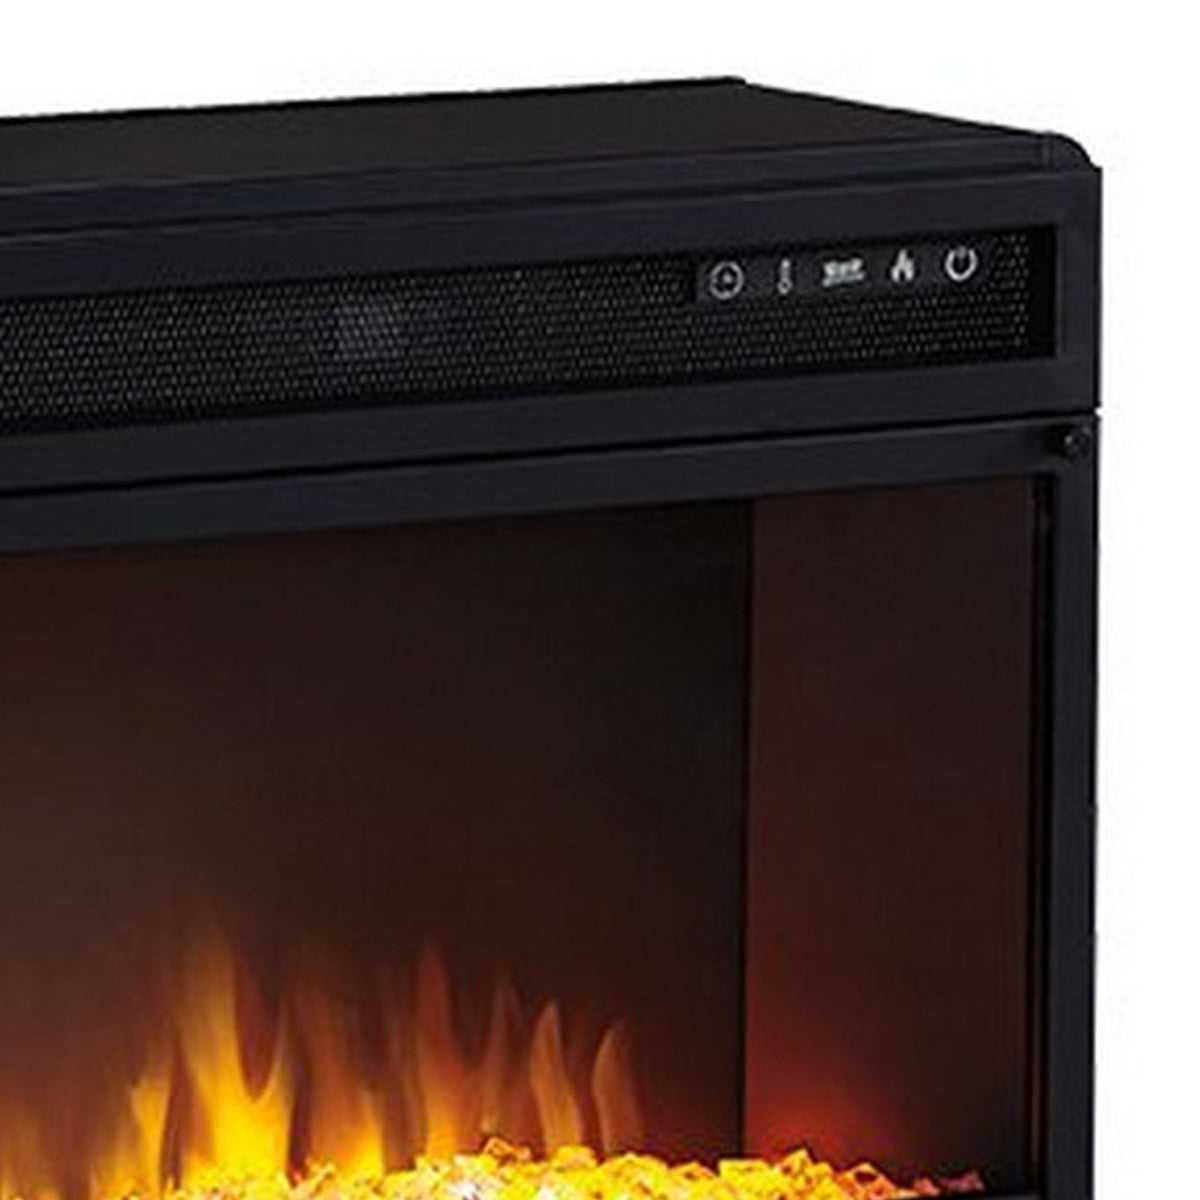 57 Inch Metal Fireplace Inset with 6 Level Temperature Setting, Black - BM227446